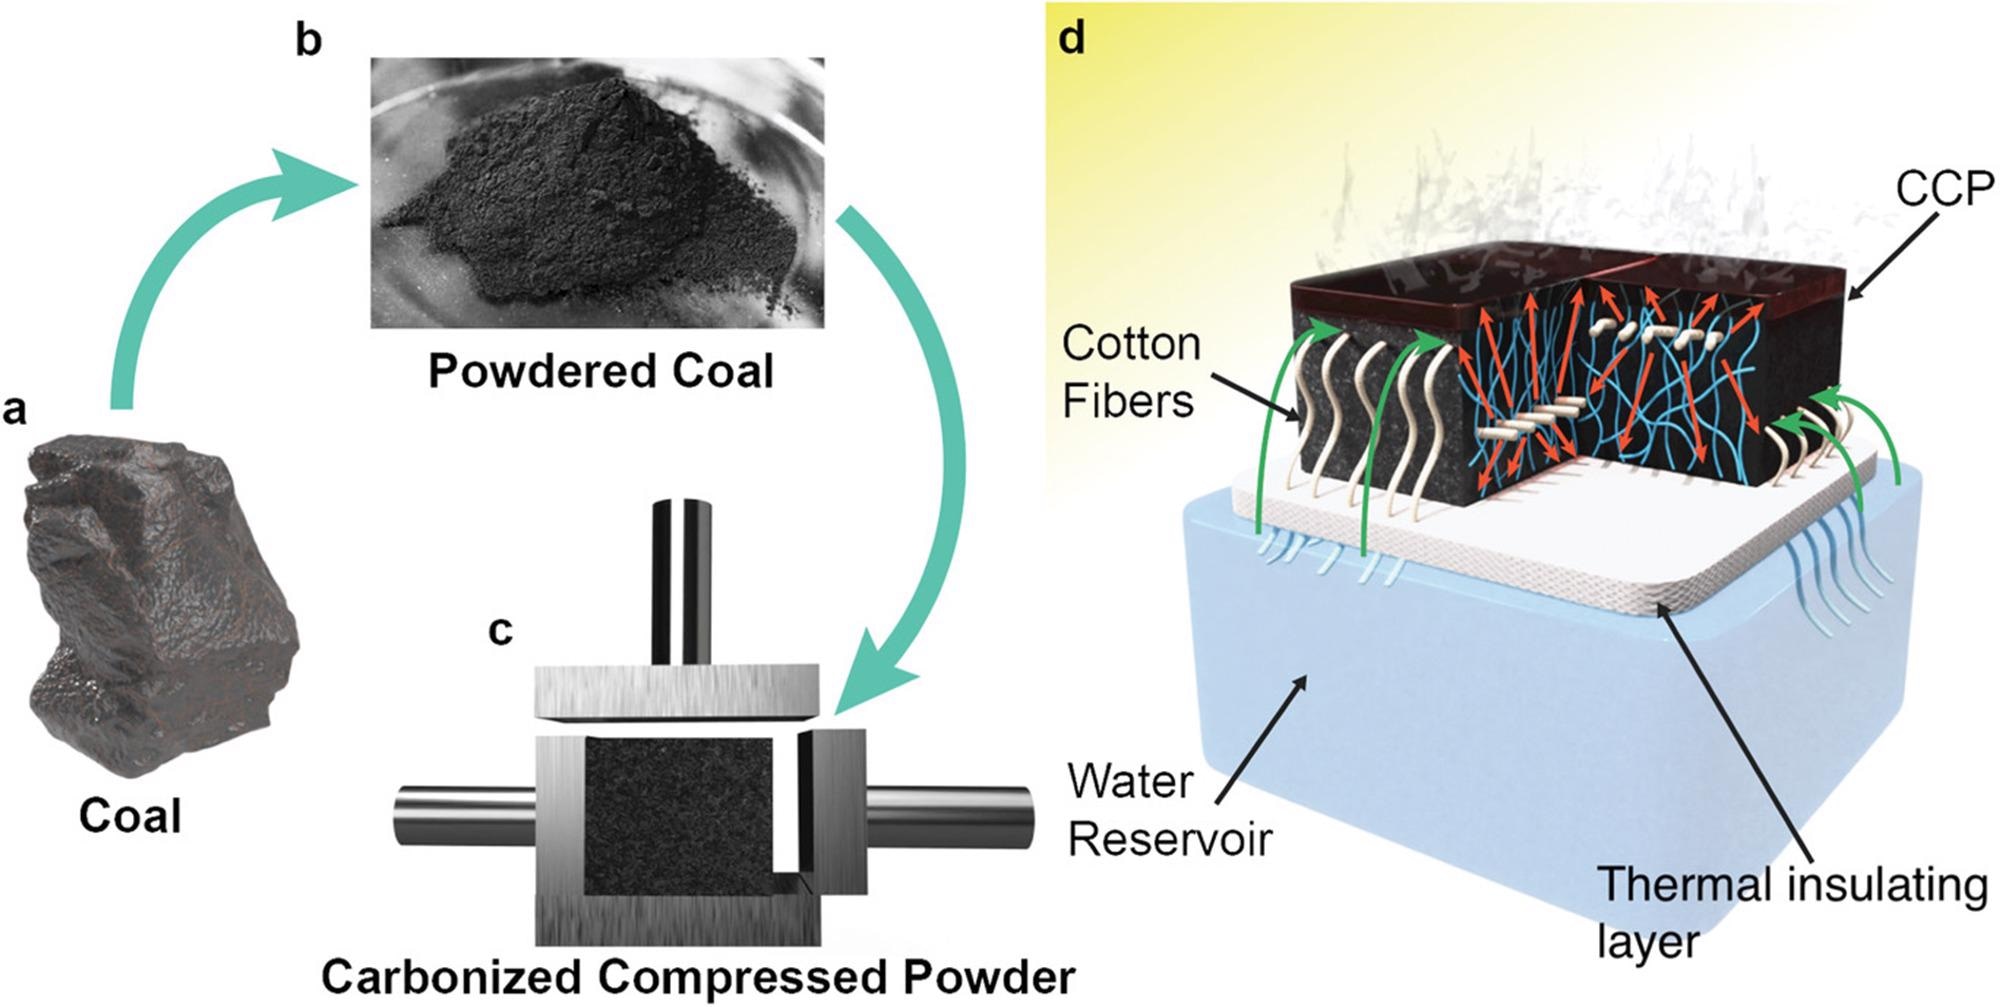 How do Blocks of Carbonized Compressed Powder Purify Water?